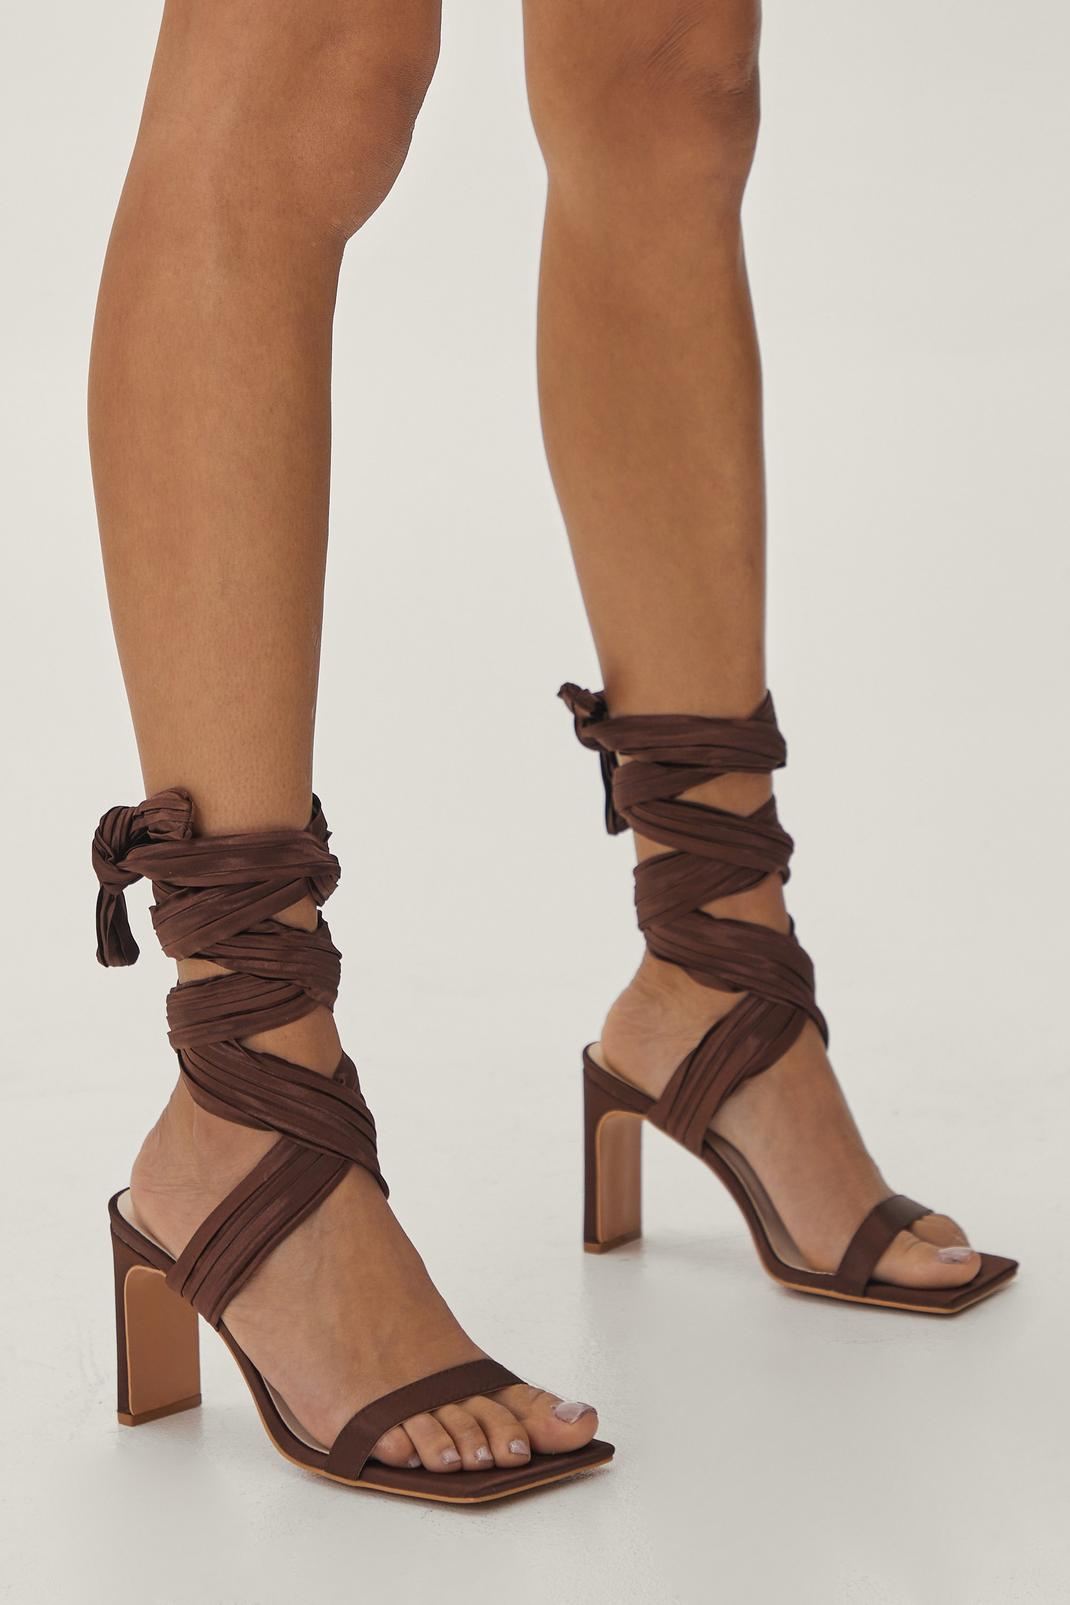 Chocolate Satin Ankle Wrap Square Toe Heels image number 1